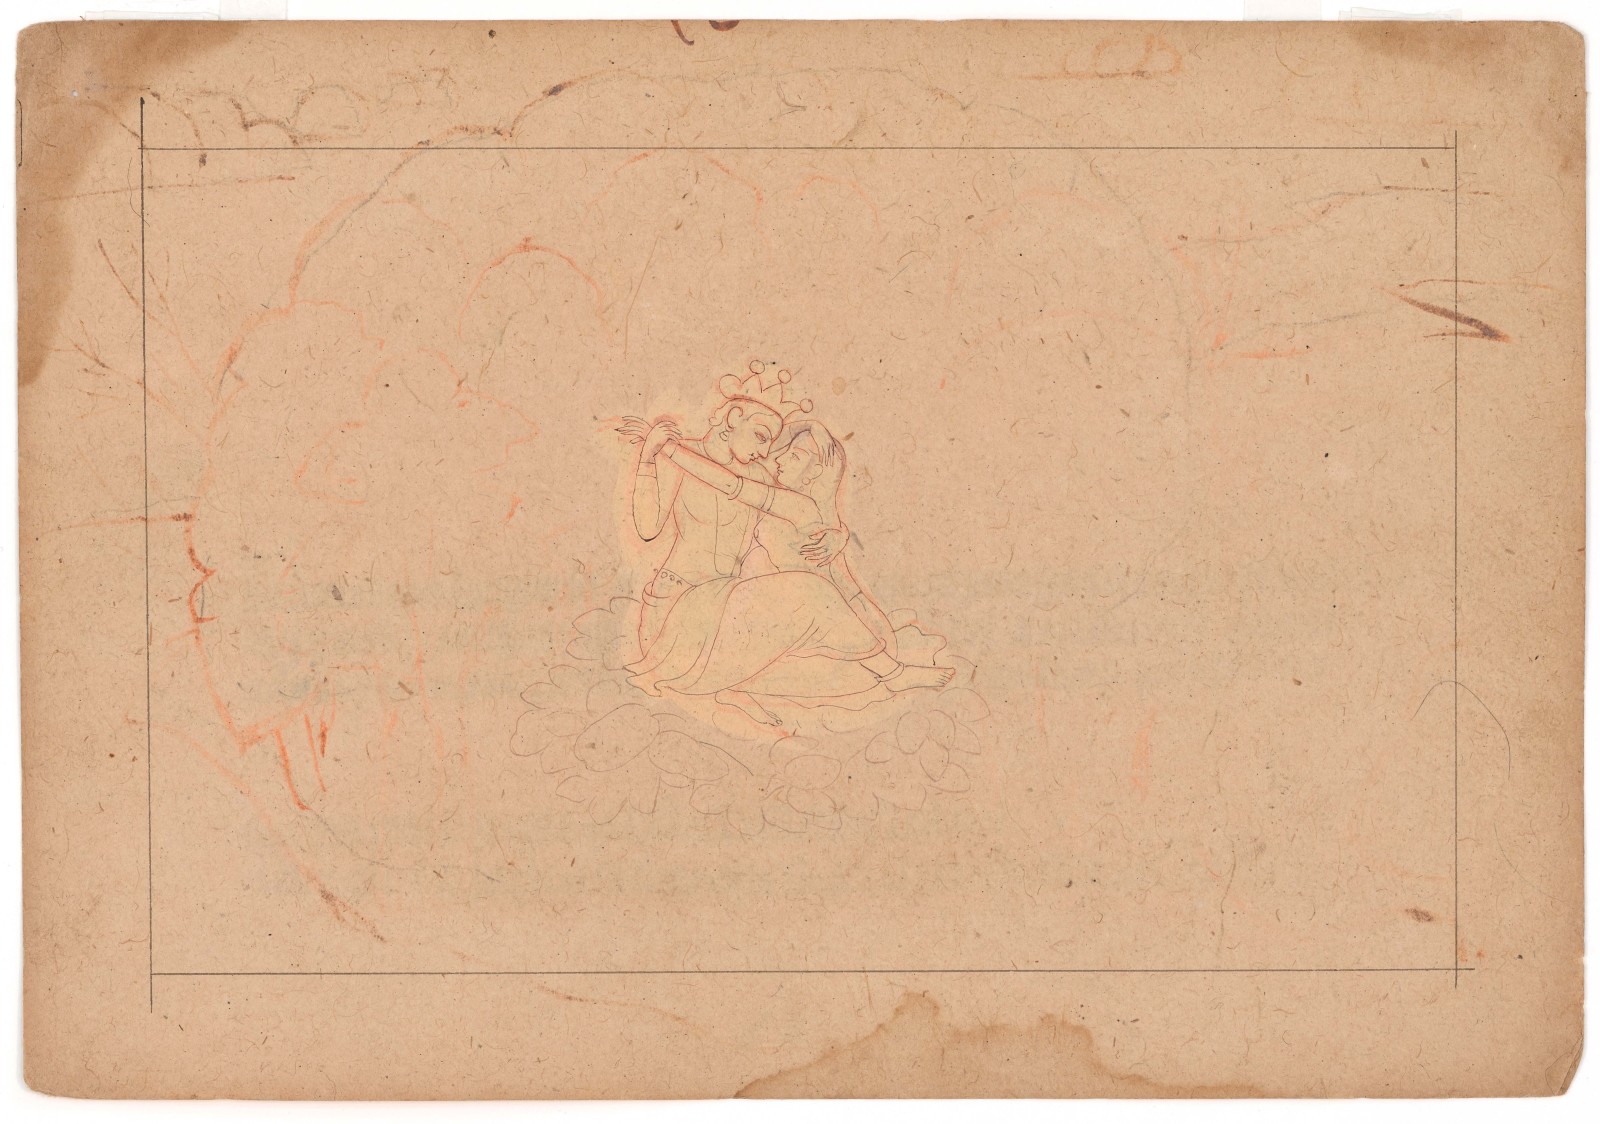 Vishnu and Shri embracing, Drawing from a set of preparatory drawings for the ‘Second Guler’ or ‘Tehri-Garhwal’ Gitagovinda Original outlines attributed to Nainsukh, c. 1765, with additions by his sons and nephews